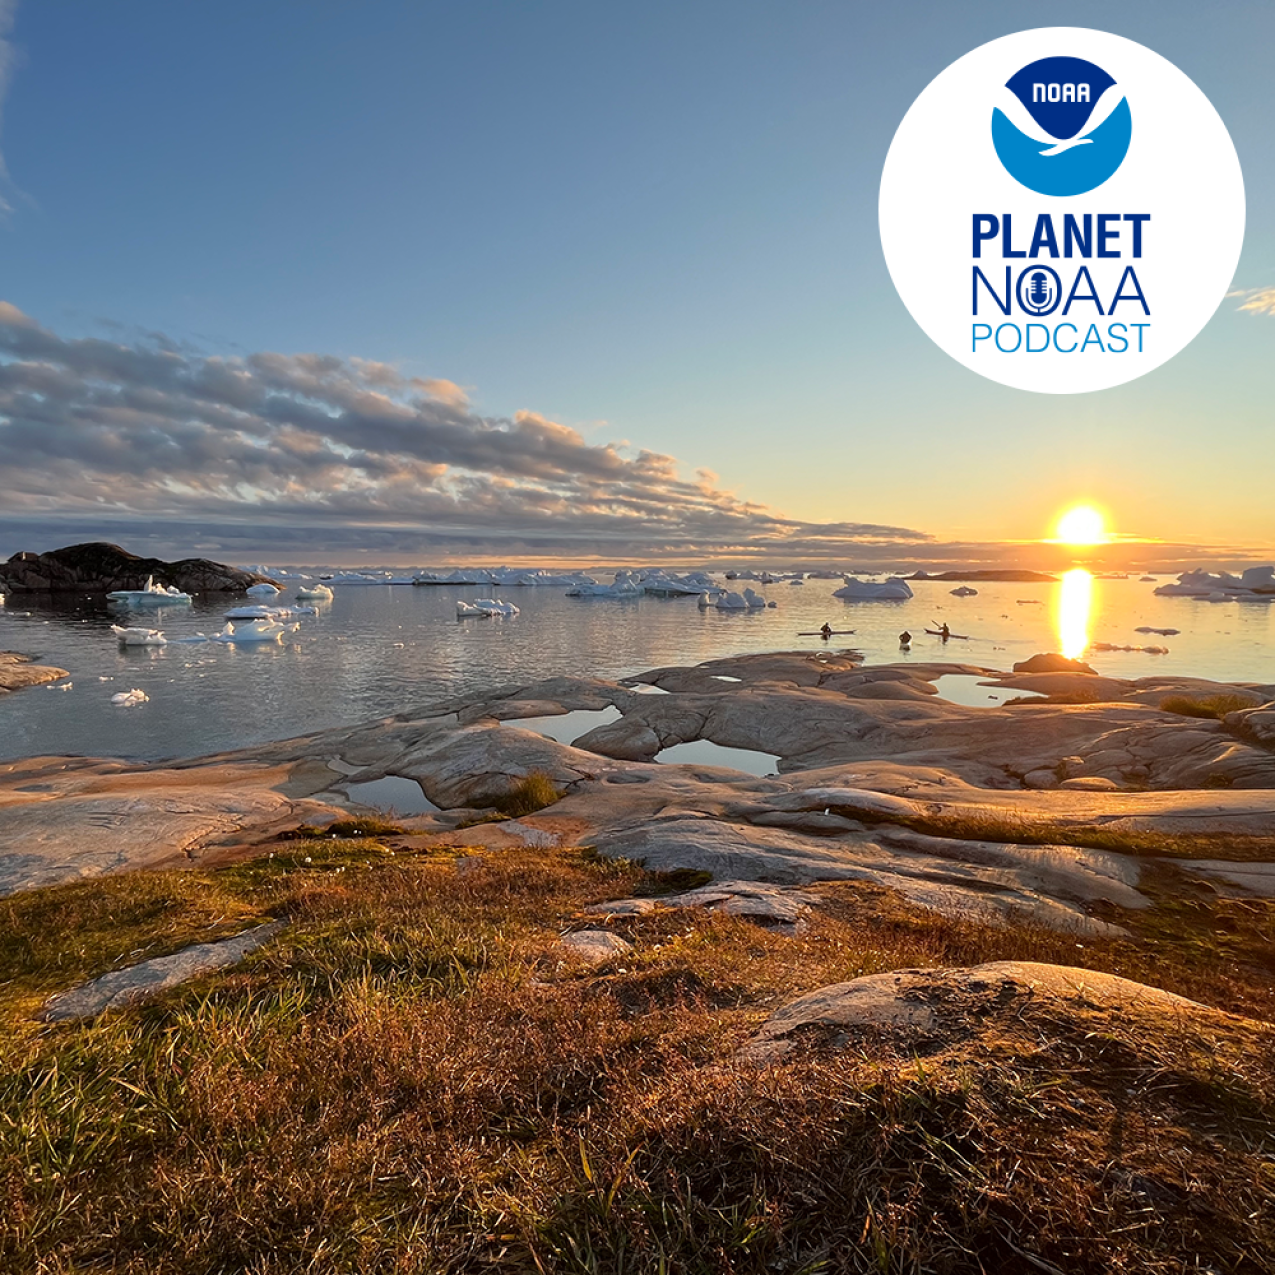 Sun setting over rocky and icy shores of Greenland with Planet NOAA logo